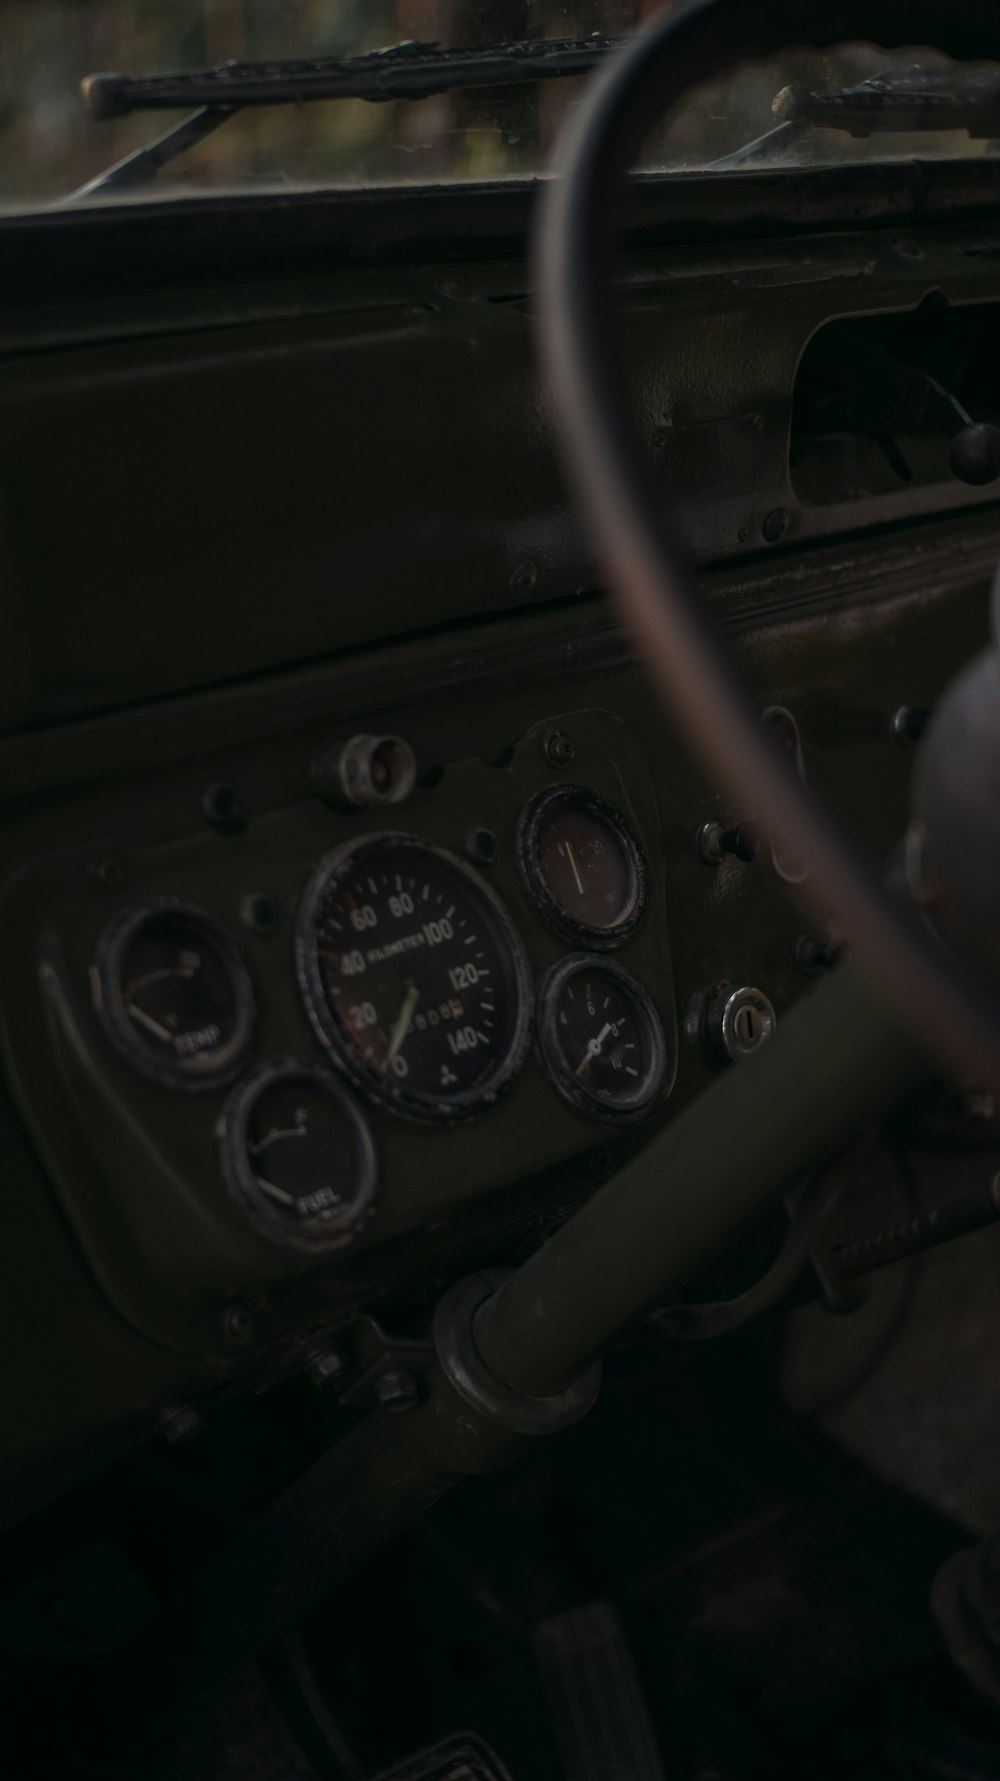 the dashboard of an old military vehicle